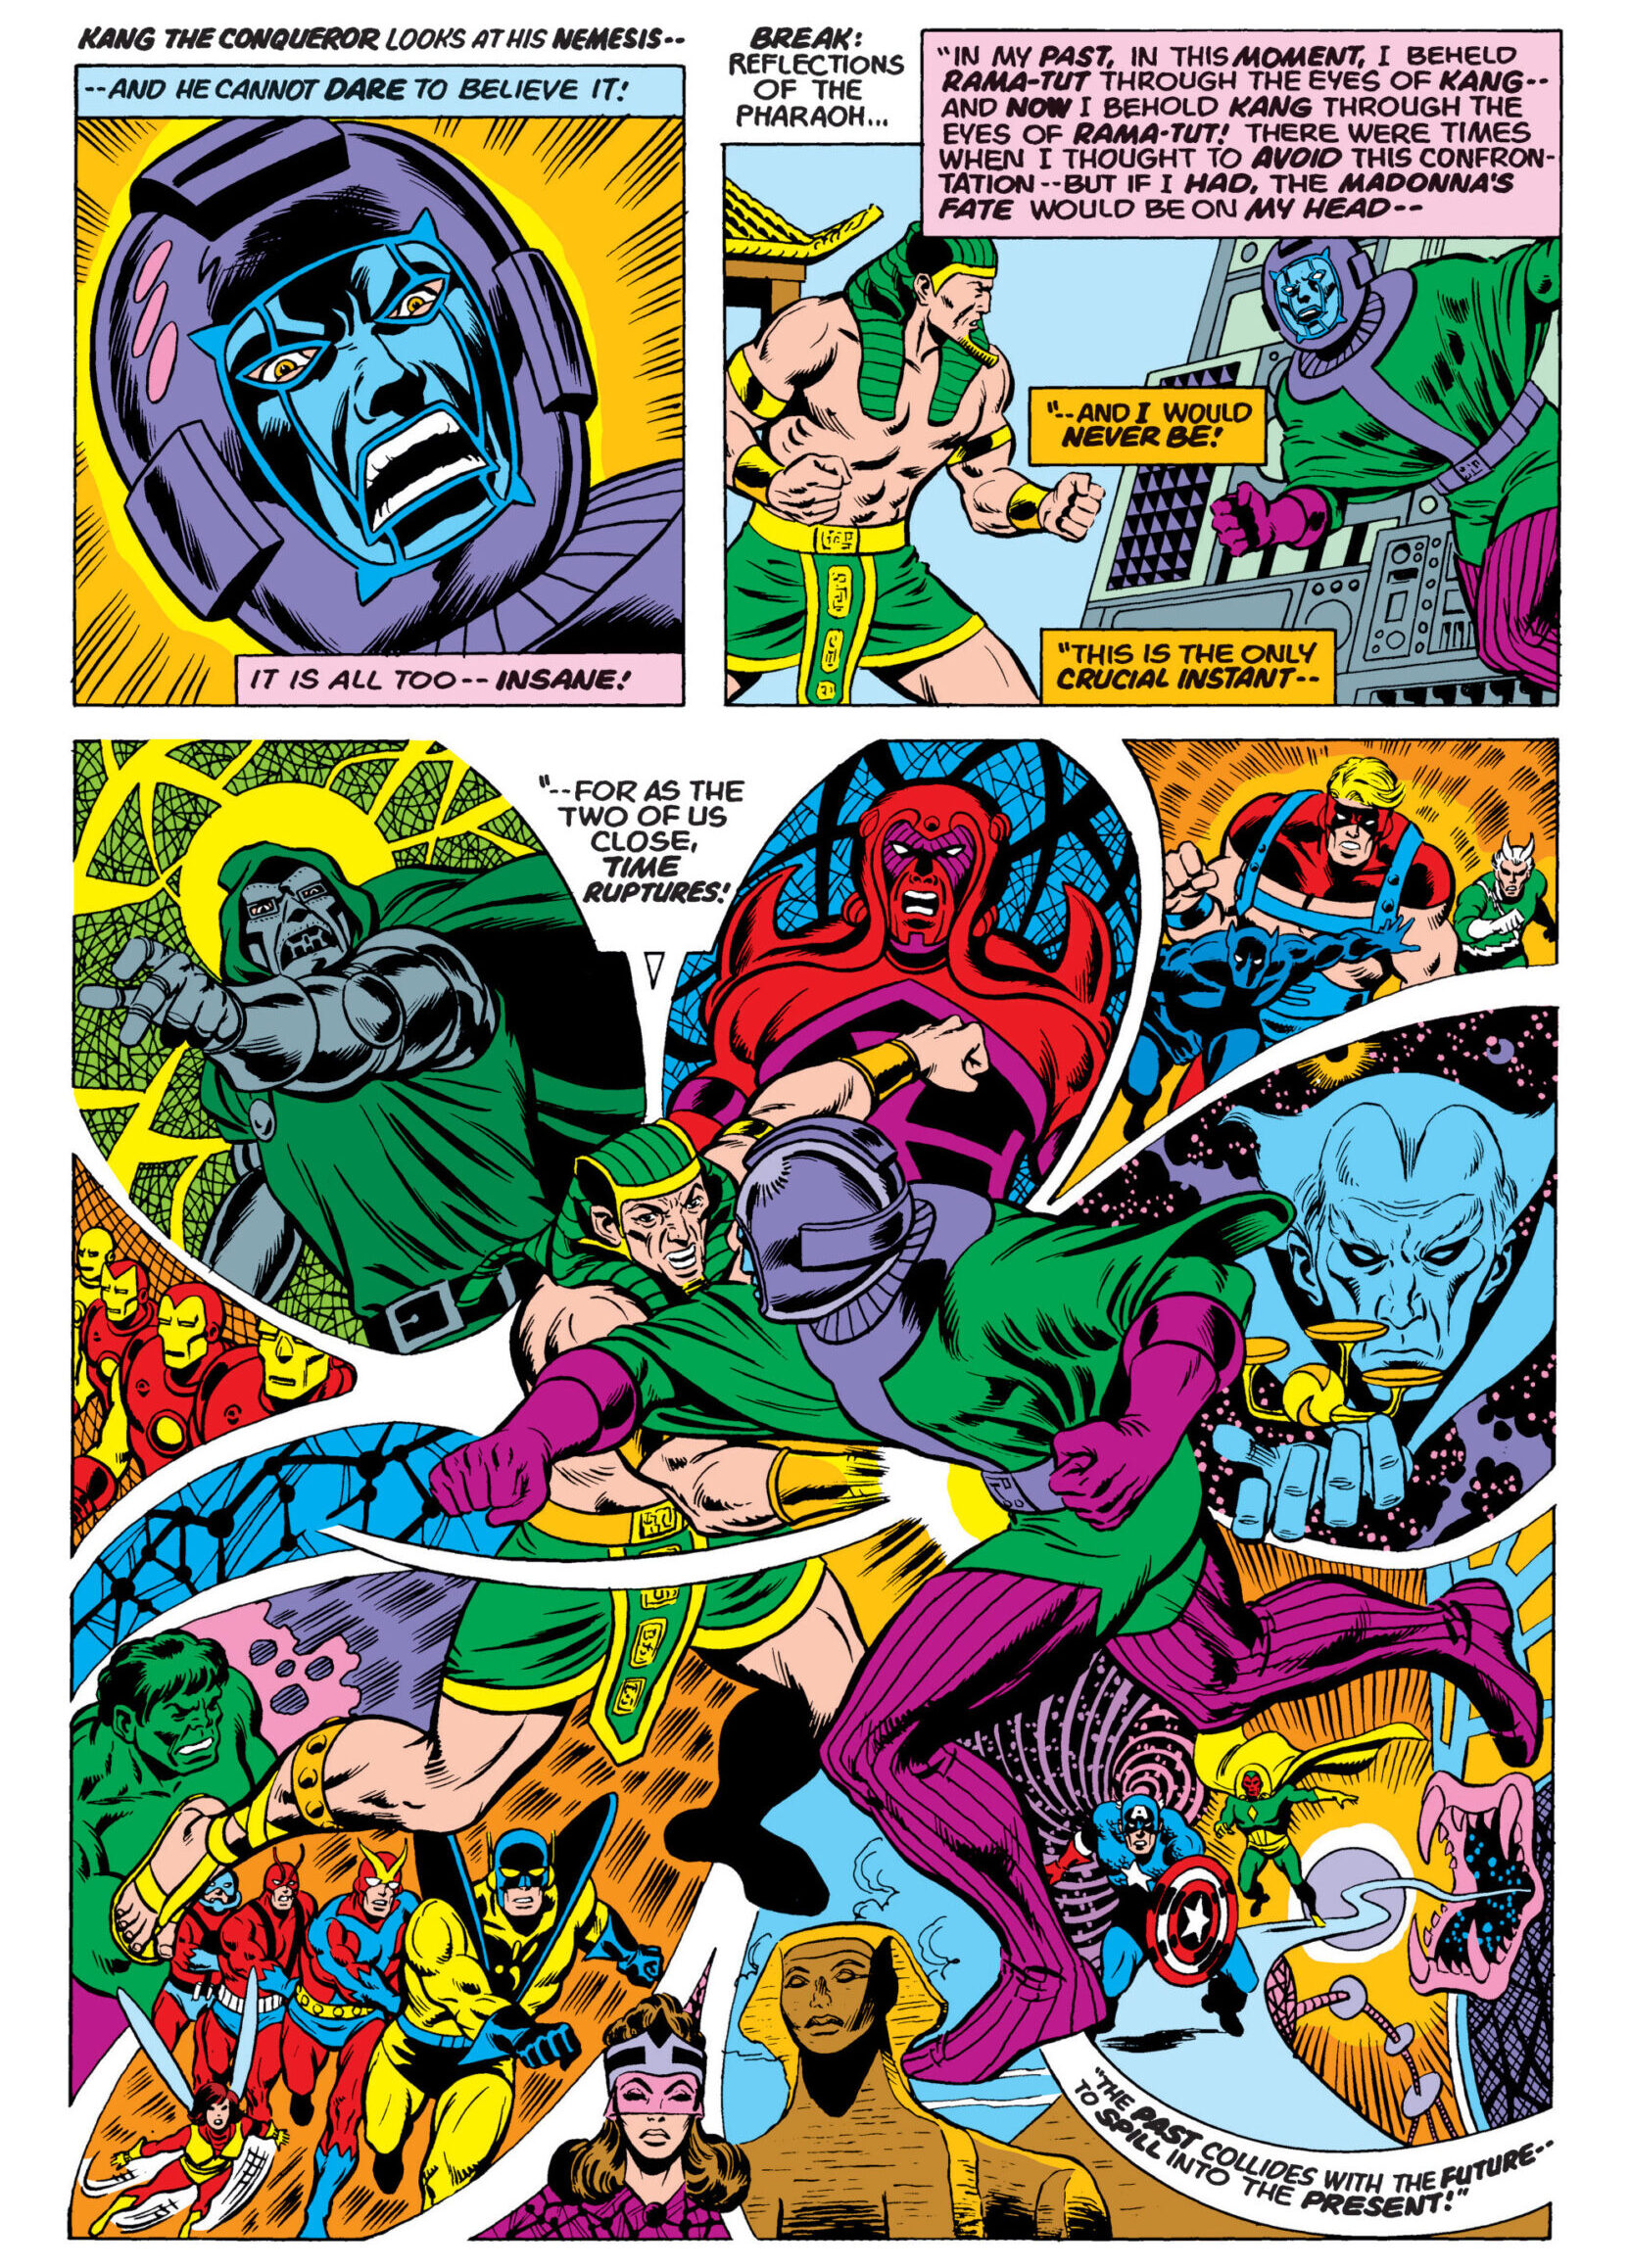 Kang grapples with Immortus in Giant-Size Avengers Vol. 1 #2 "A Blast From the Past" (1974), Marvel Comics. Art by Dave Cockrum, Bill Mantlo, and Tom Orzechowski.